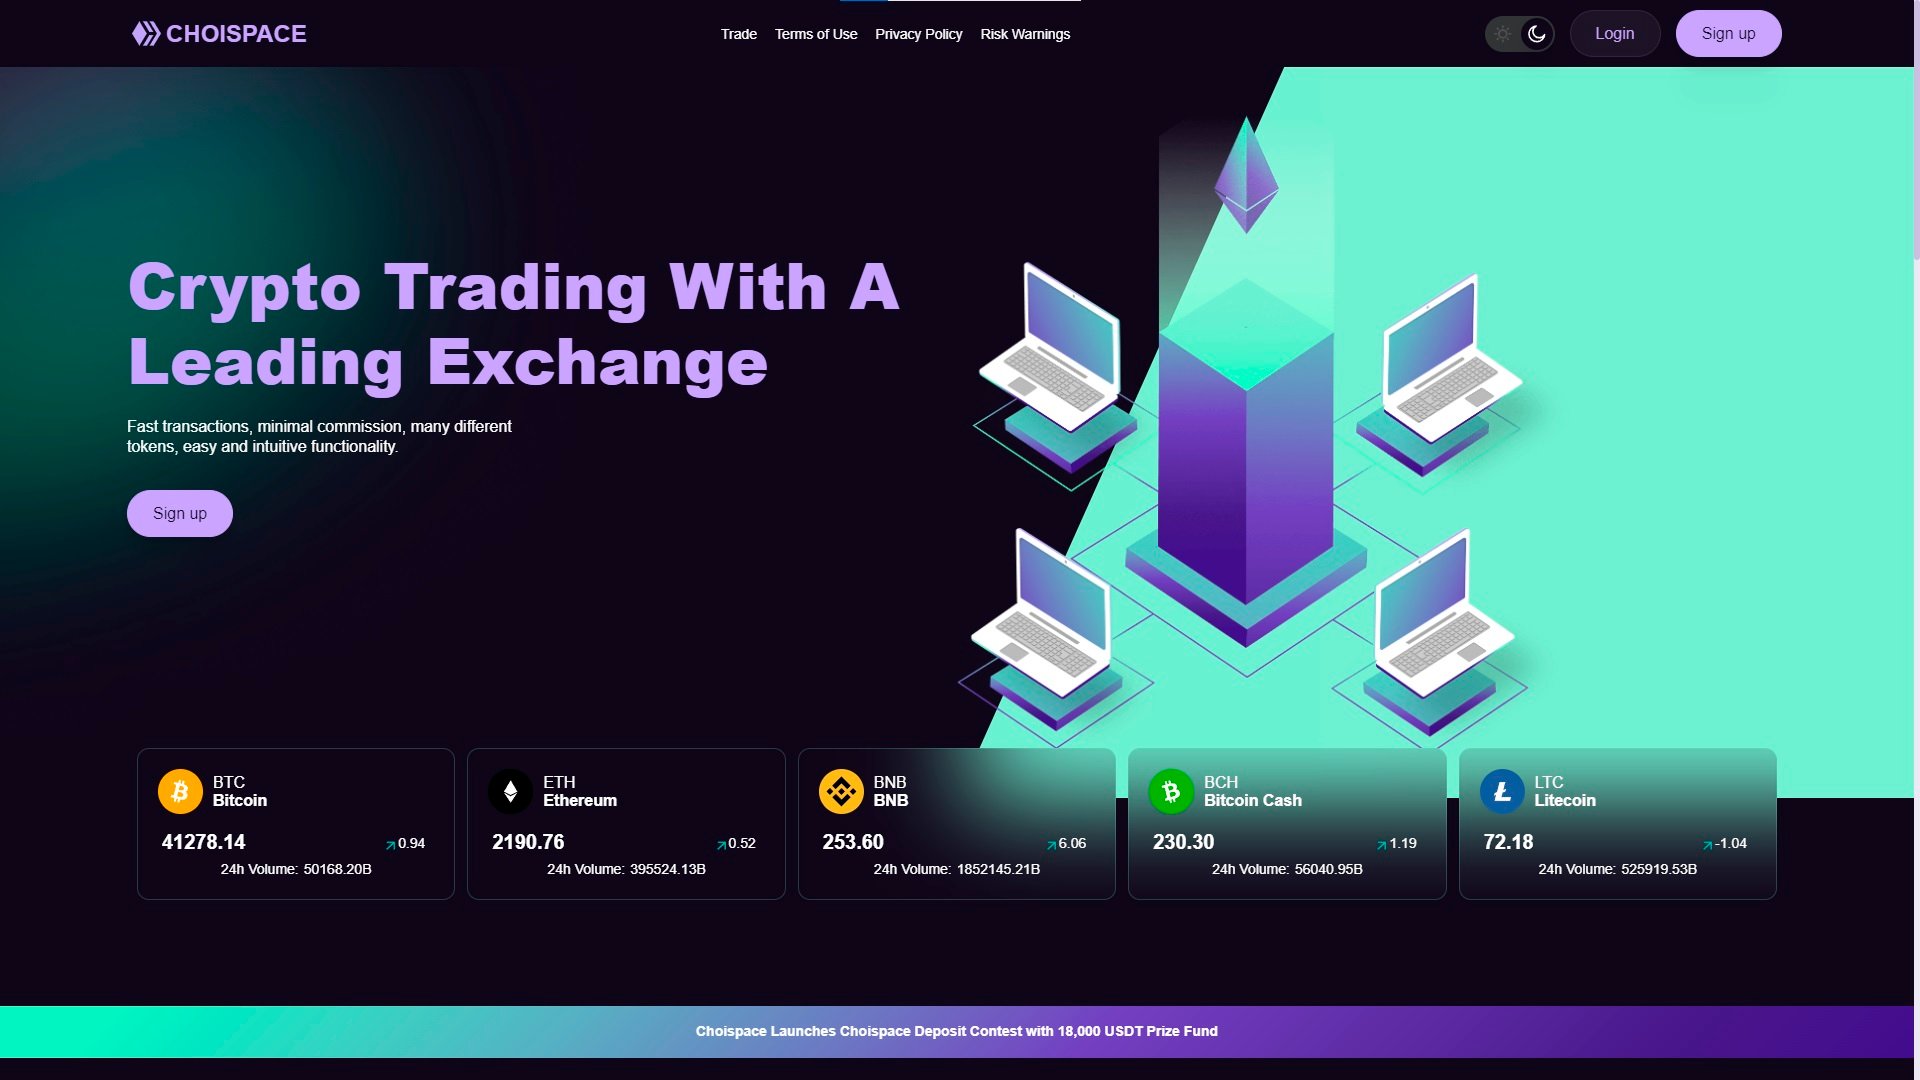 Is Choispace a Scam or Legit Cryptocurrency Trading Platform at choispace.com?